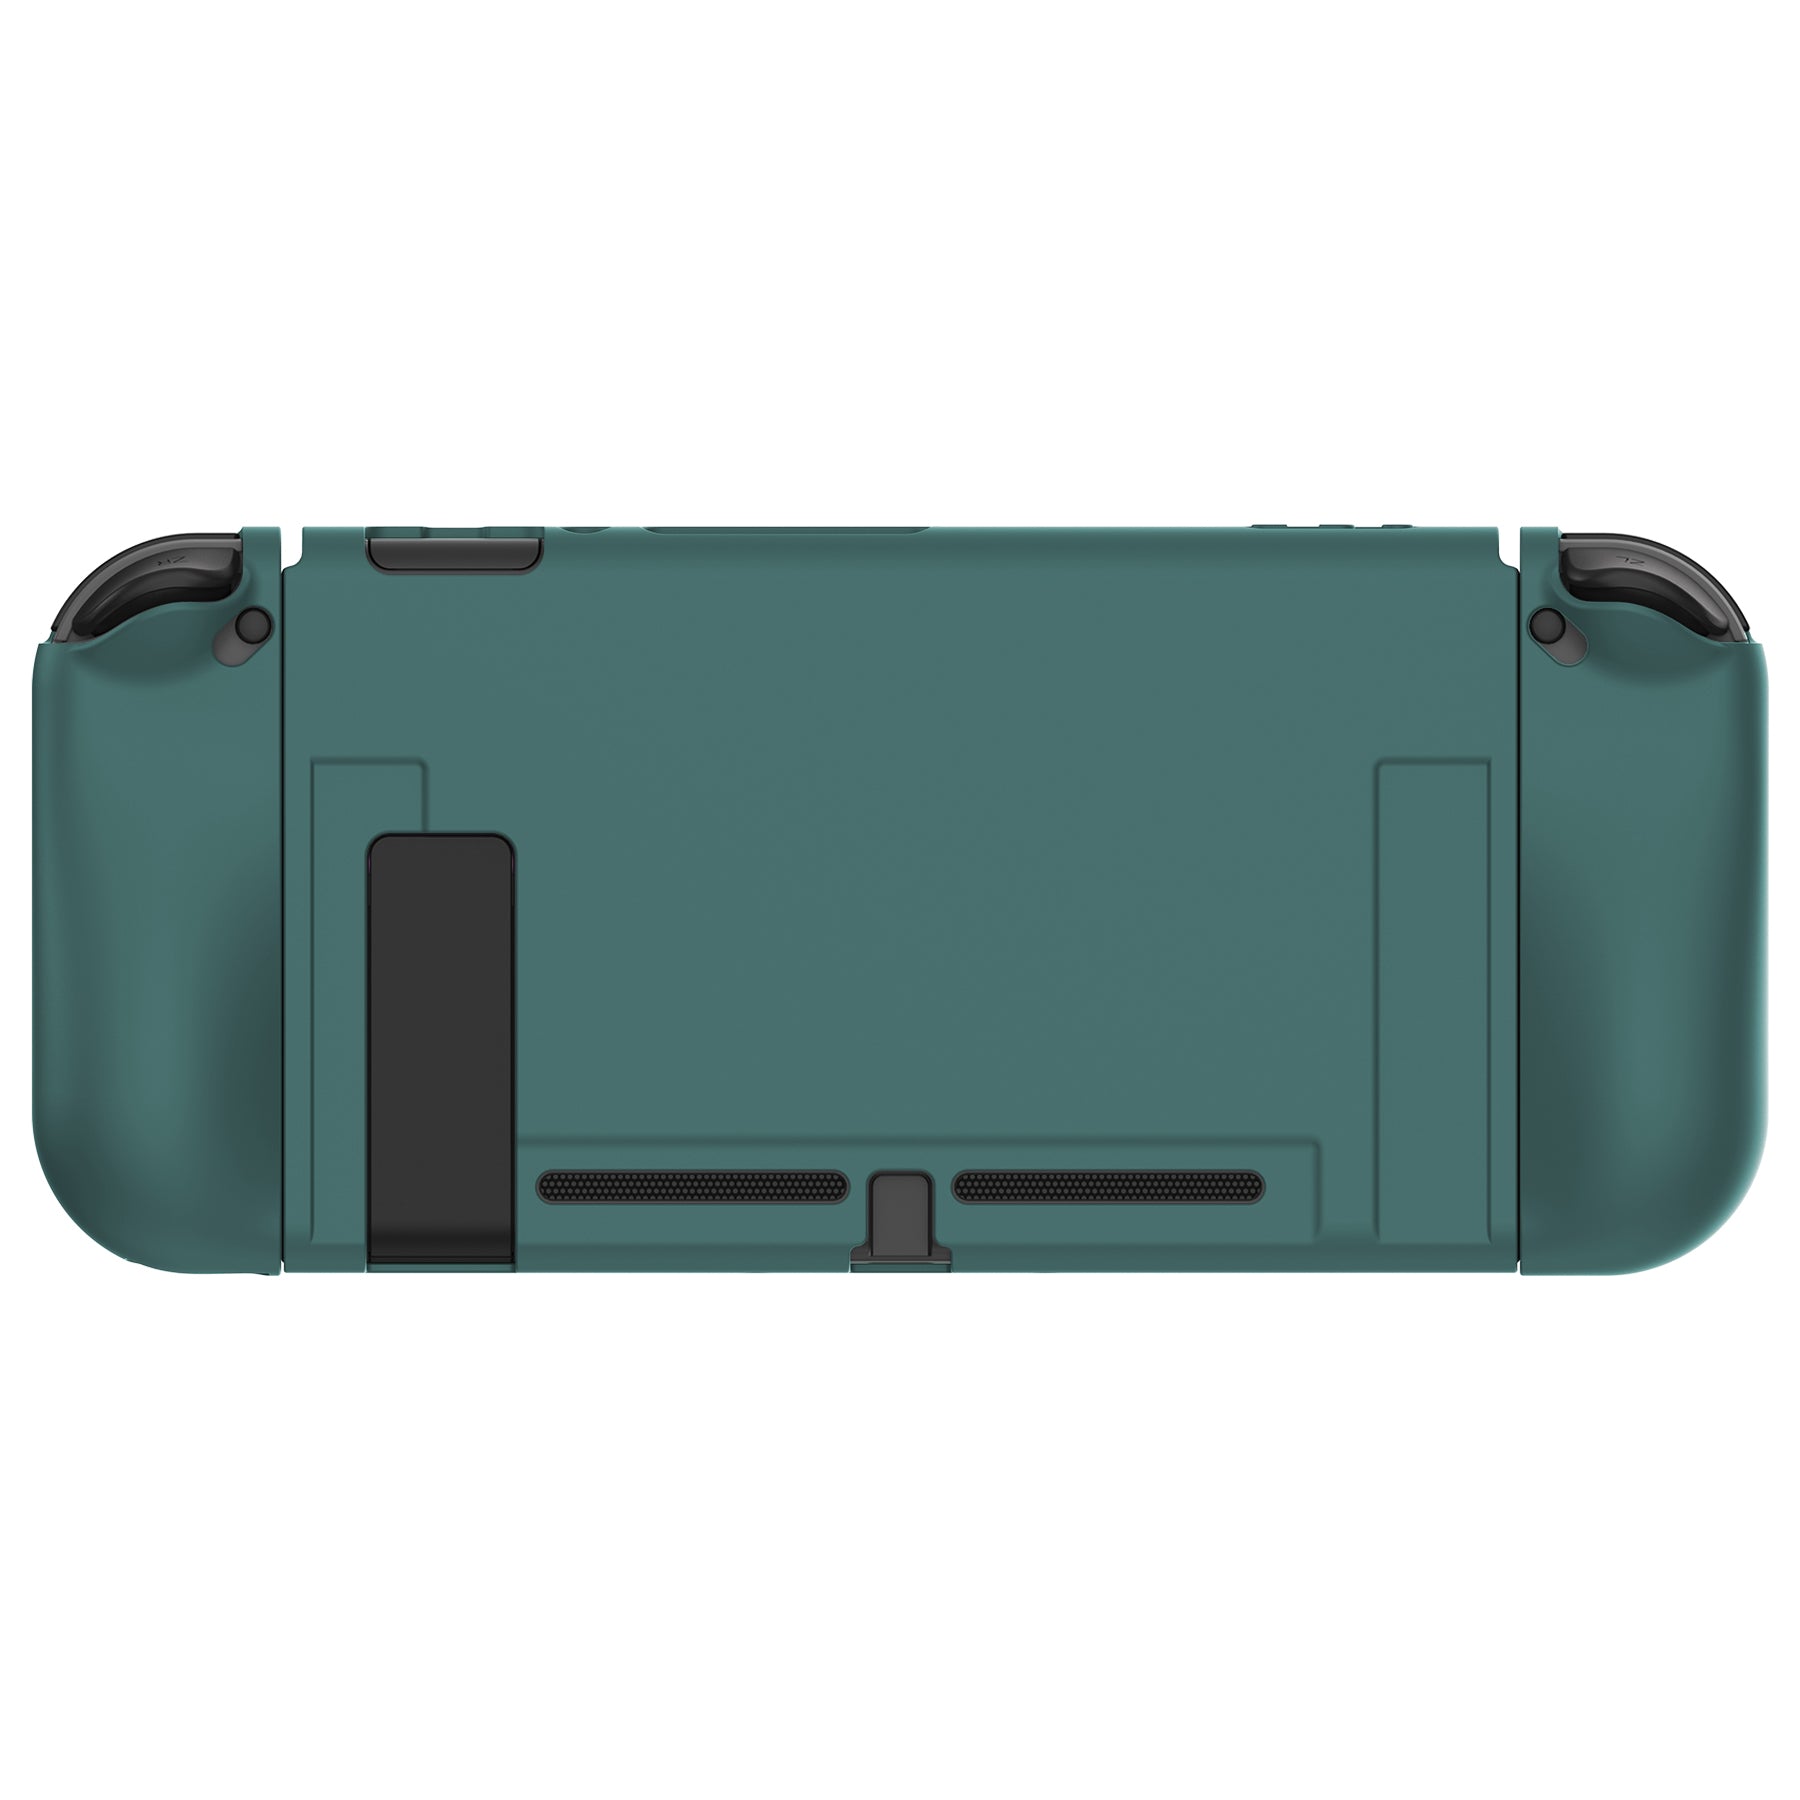 PlayVital Hunter Green Protective Case for NS Switch, Soft TPU Slim Case Cover for NS Switch Console with Colorful ABXY Direction Button Caps - NTU6036G2 PlayVital